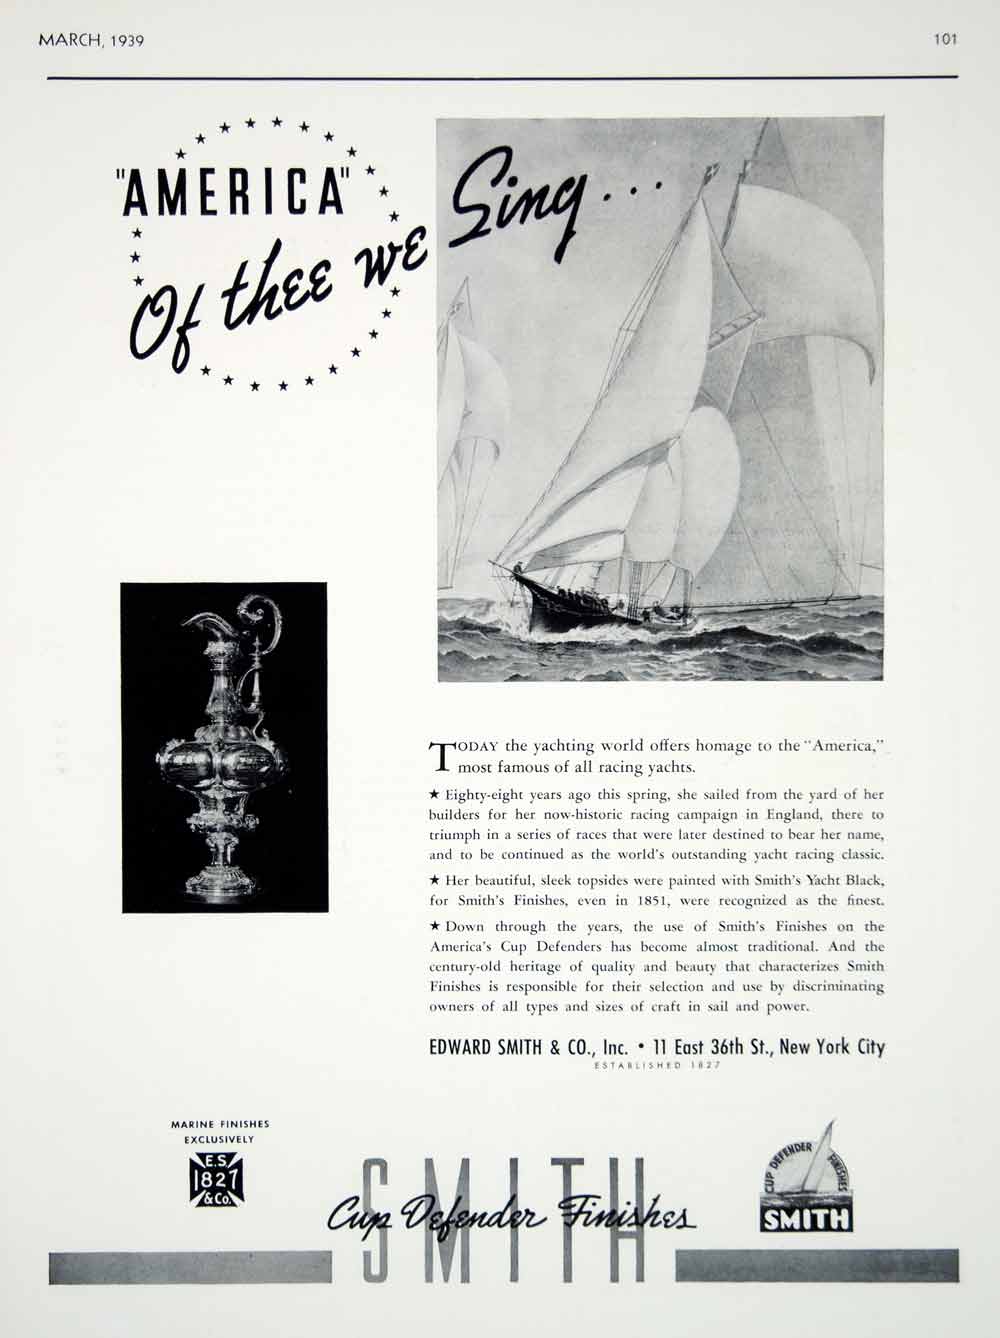 1939 Ad Edward Smith Marine Paint Yacht "America" Yachting Race America's Cup